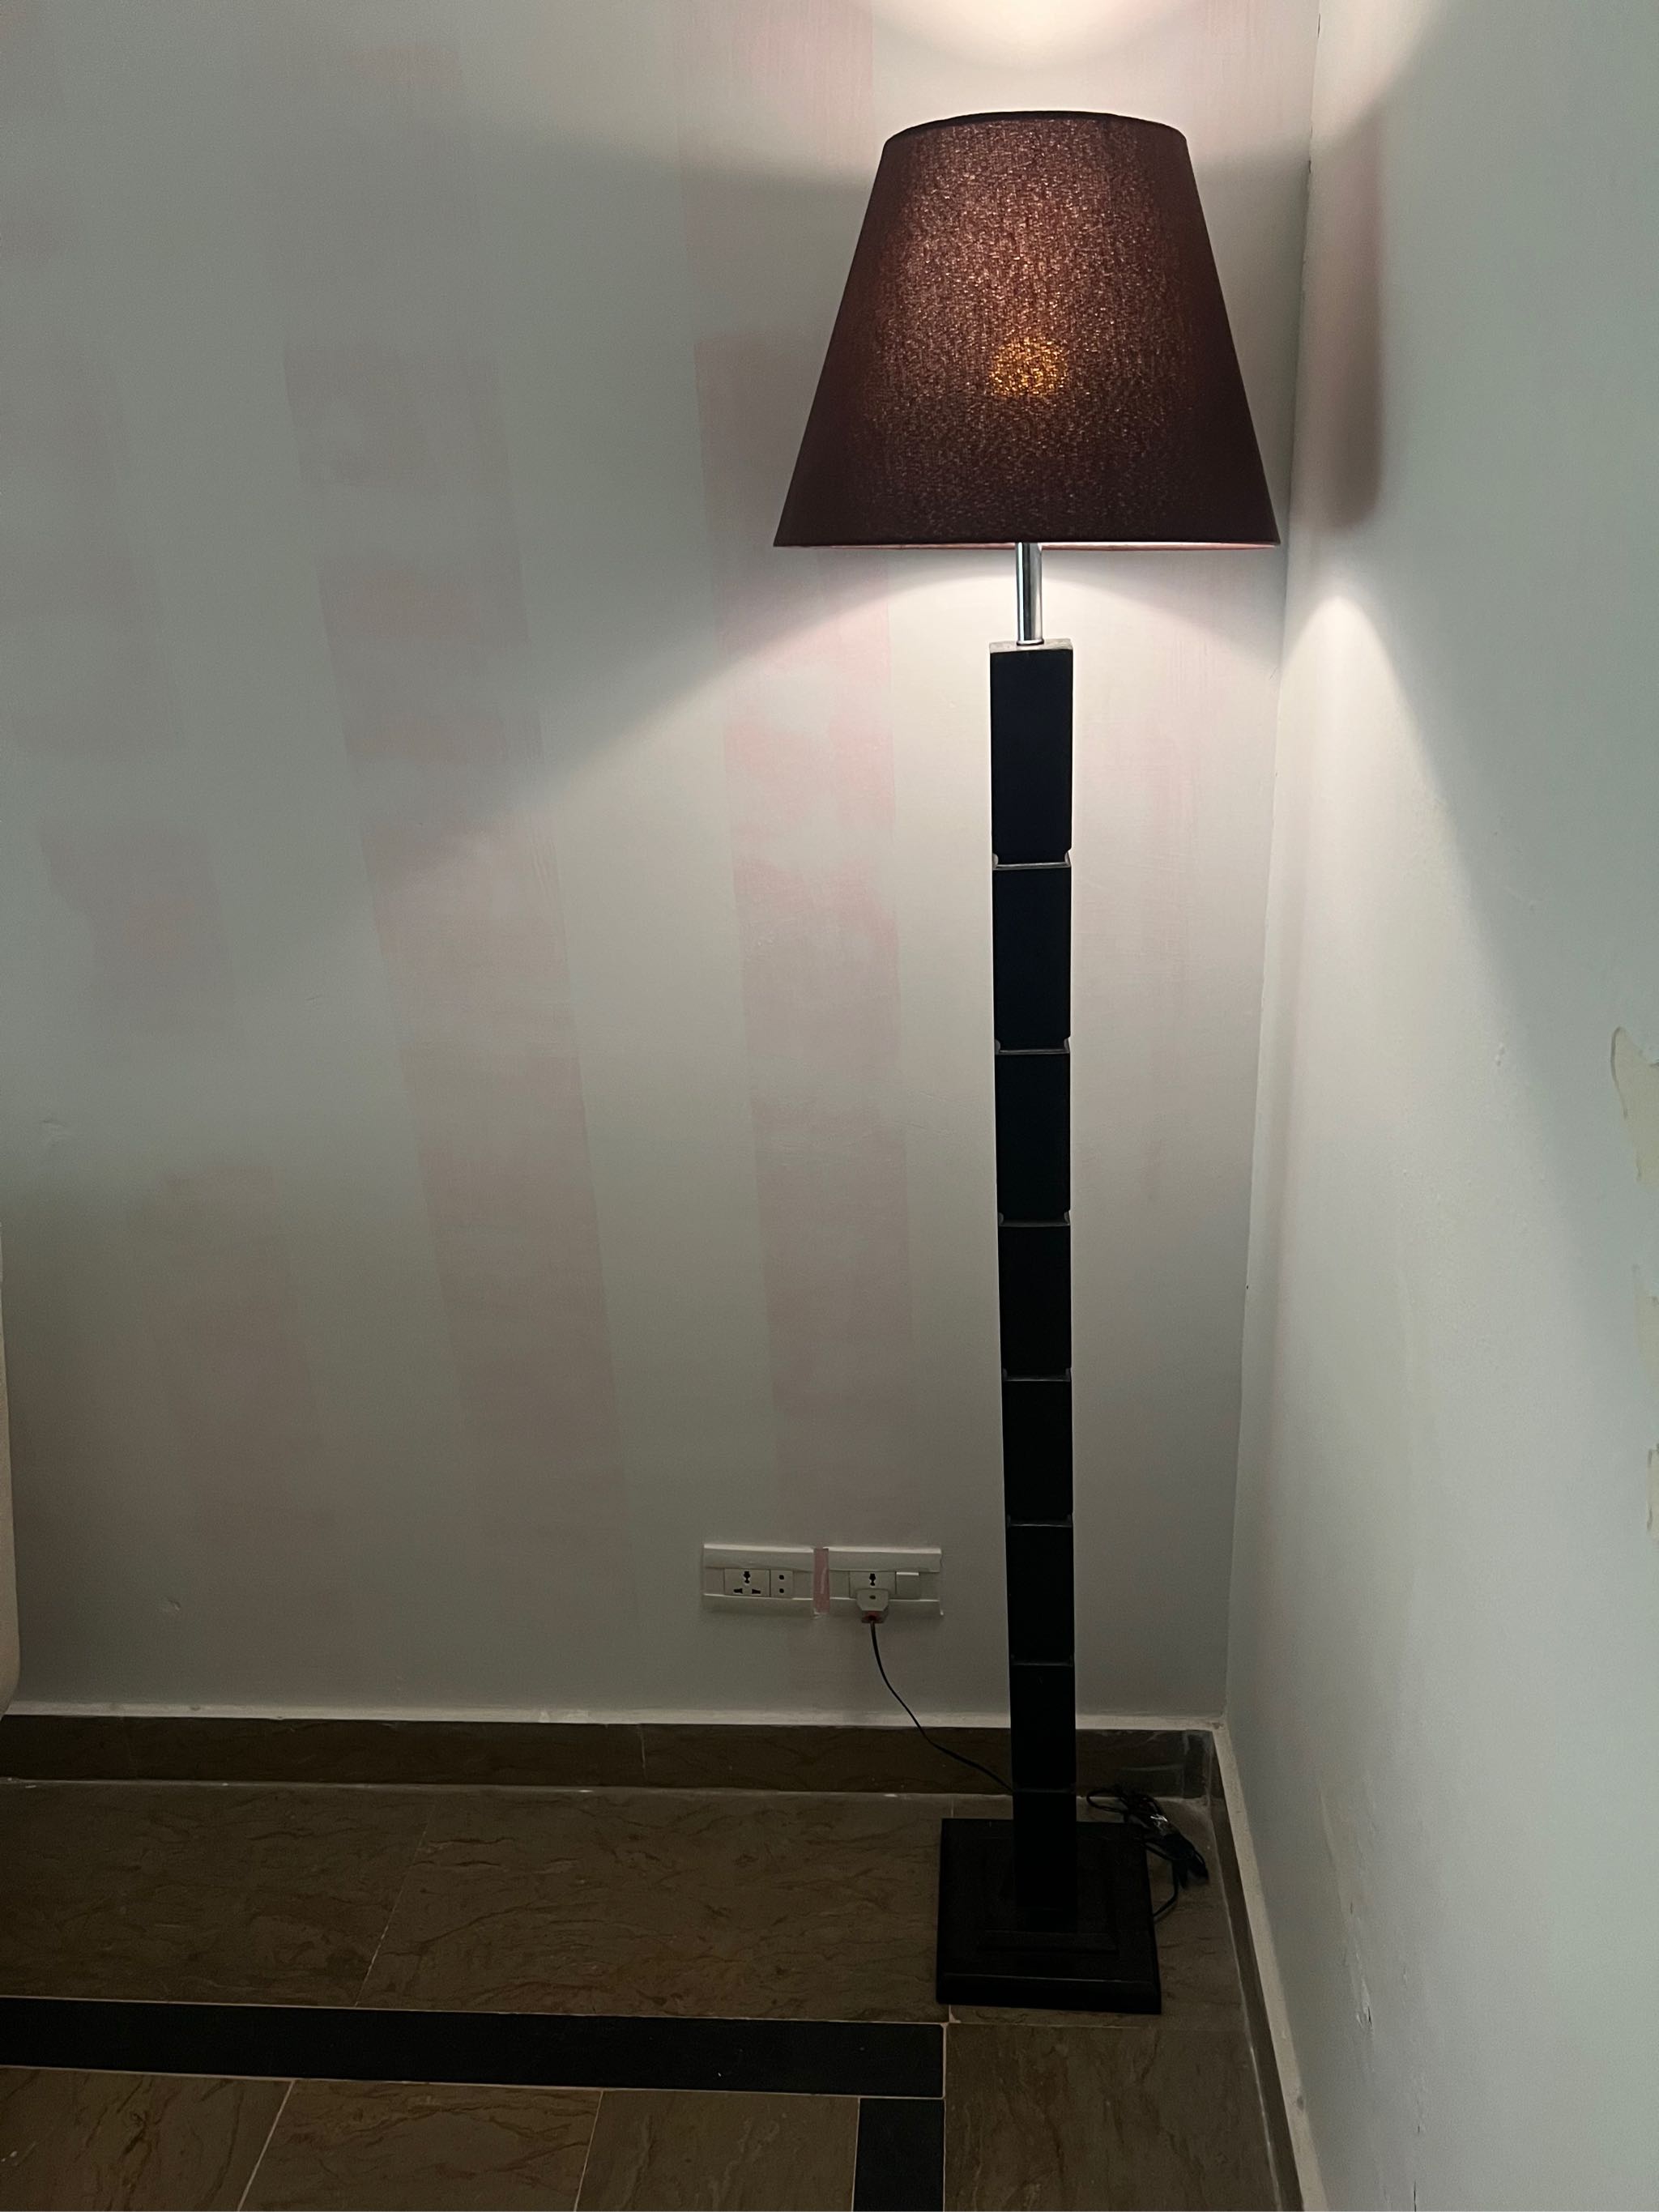 floor corners lamp (H.62.inch)for home decor, office decor &new home gifts:  Buy Online at Best Prices in Pakistan | Daraz.pk